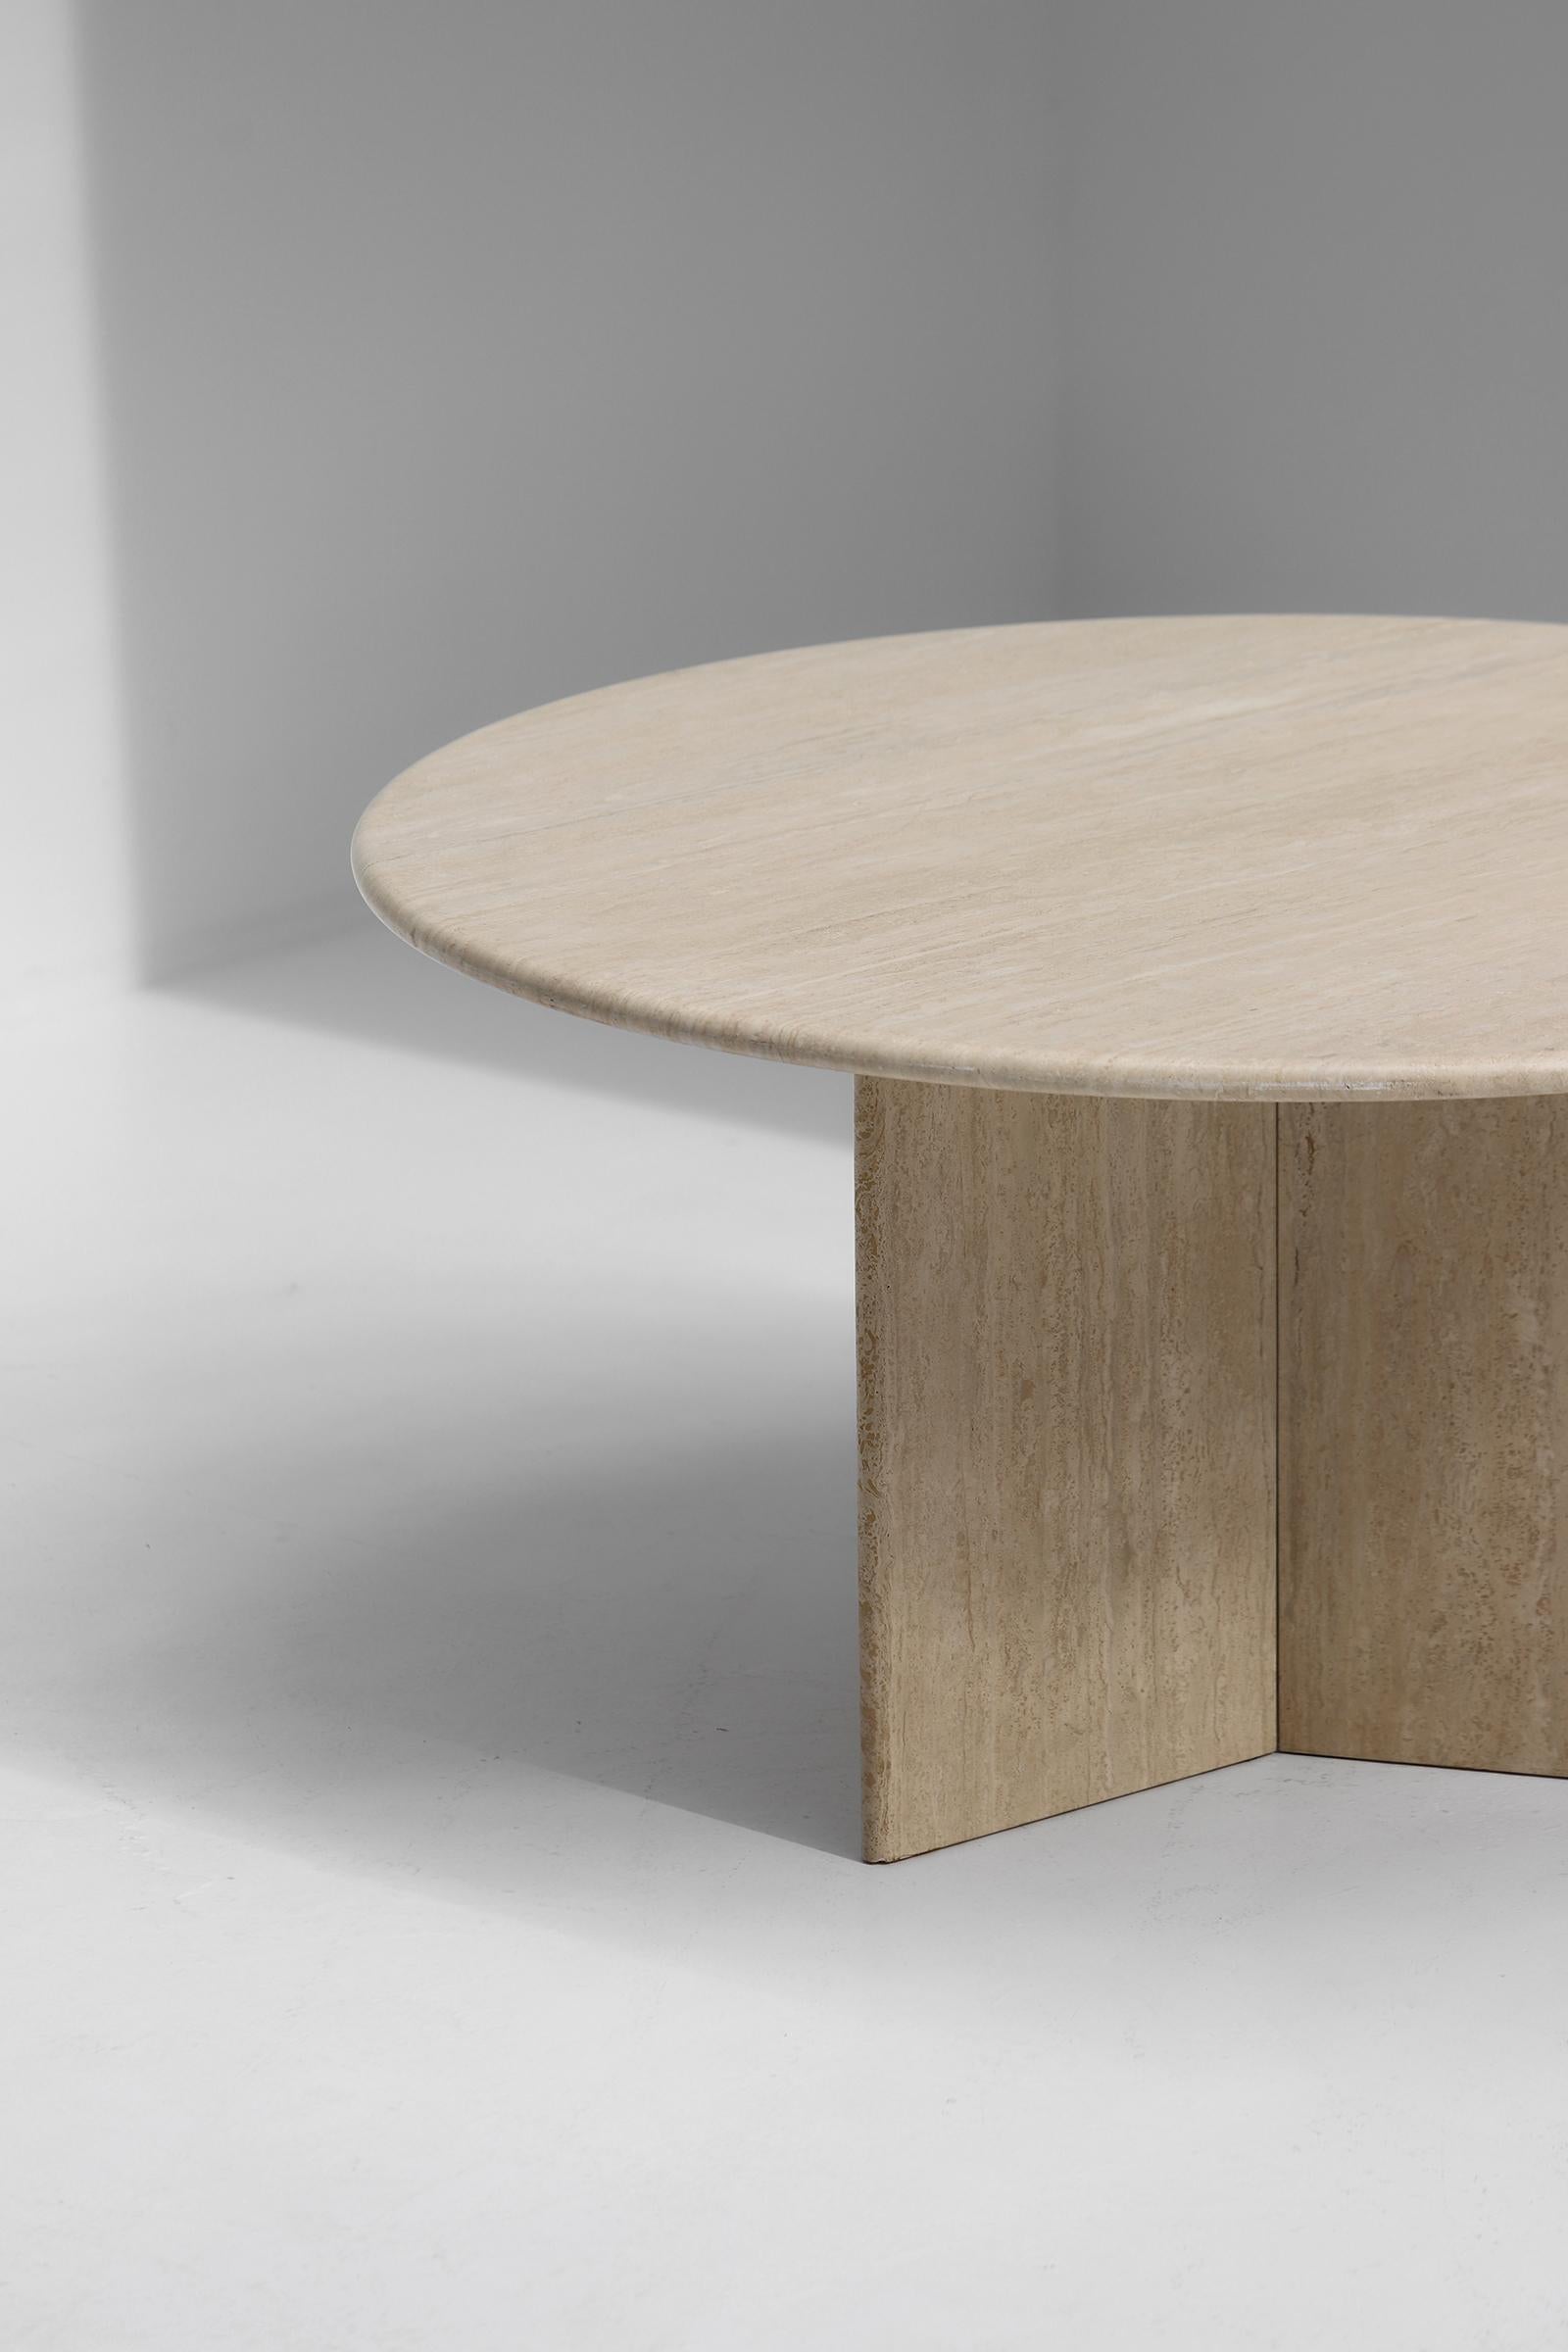 Decorative Travertine Dining Table Designed in the 1970s 4